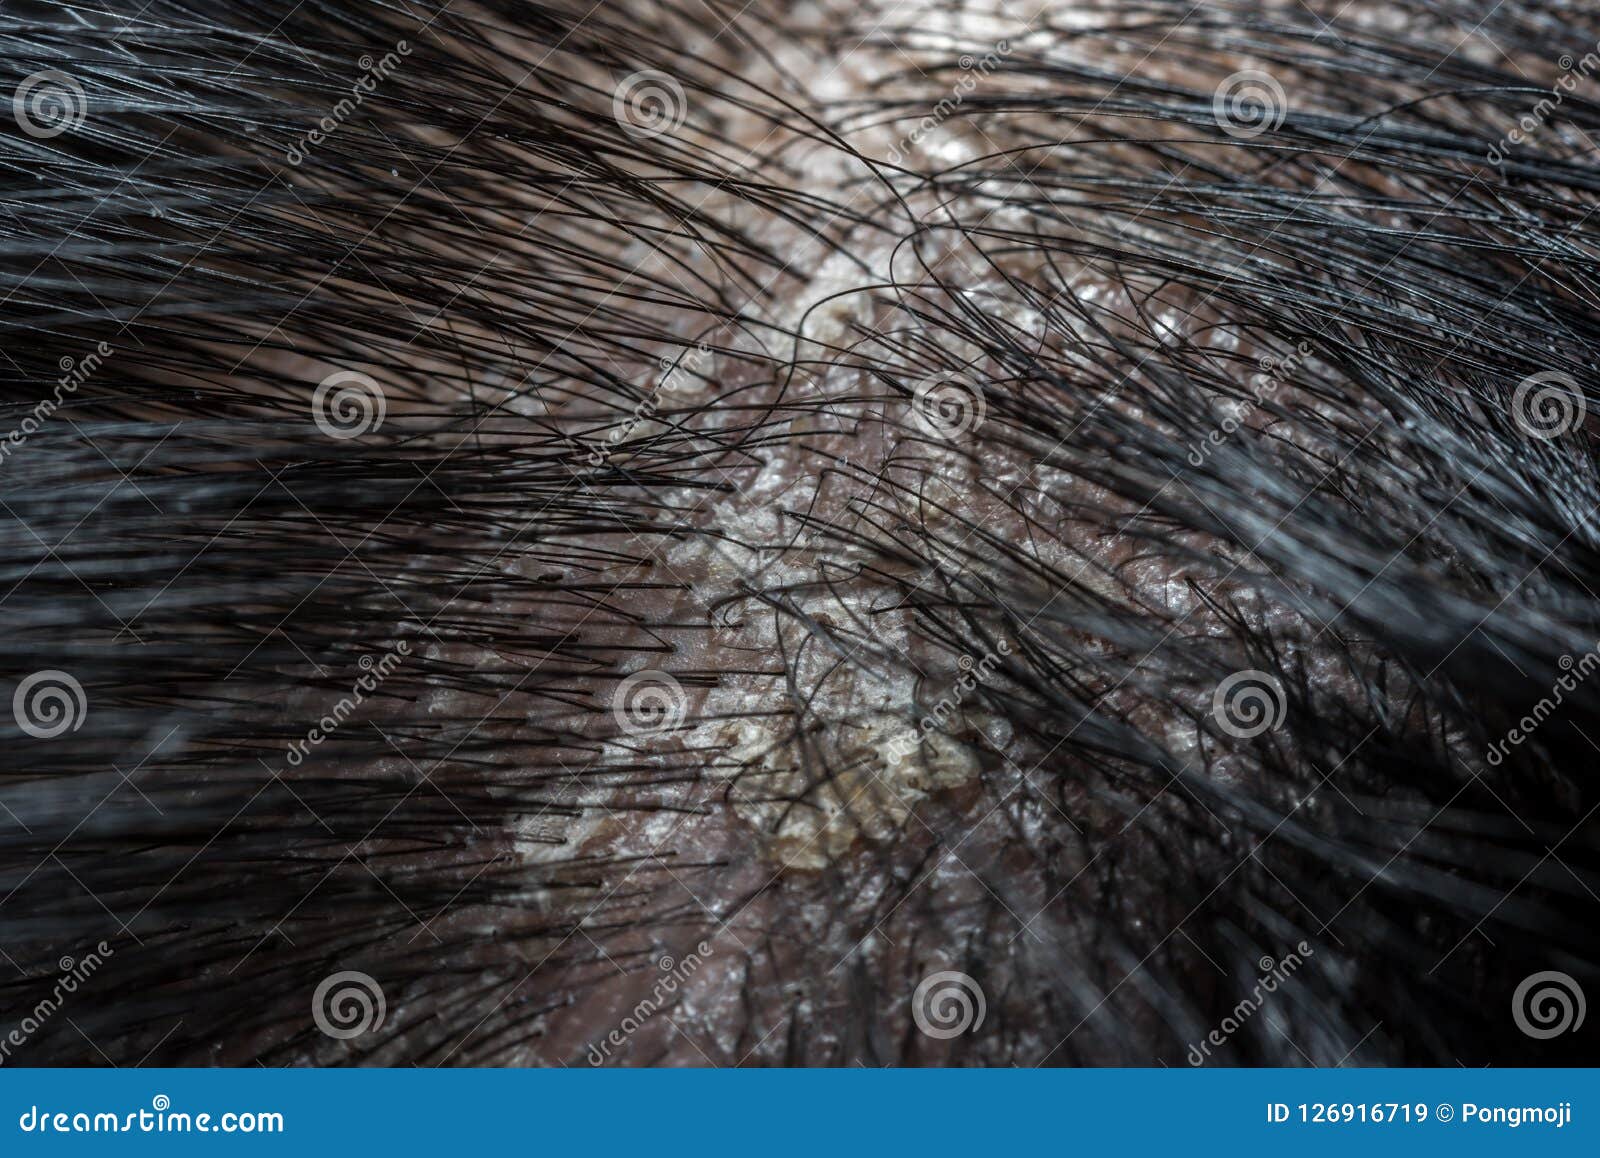 Hair Scalp with Dandruff and Scaly from Psoriasis Stock Image - Image of  background, annoying: 126916719